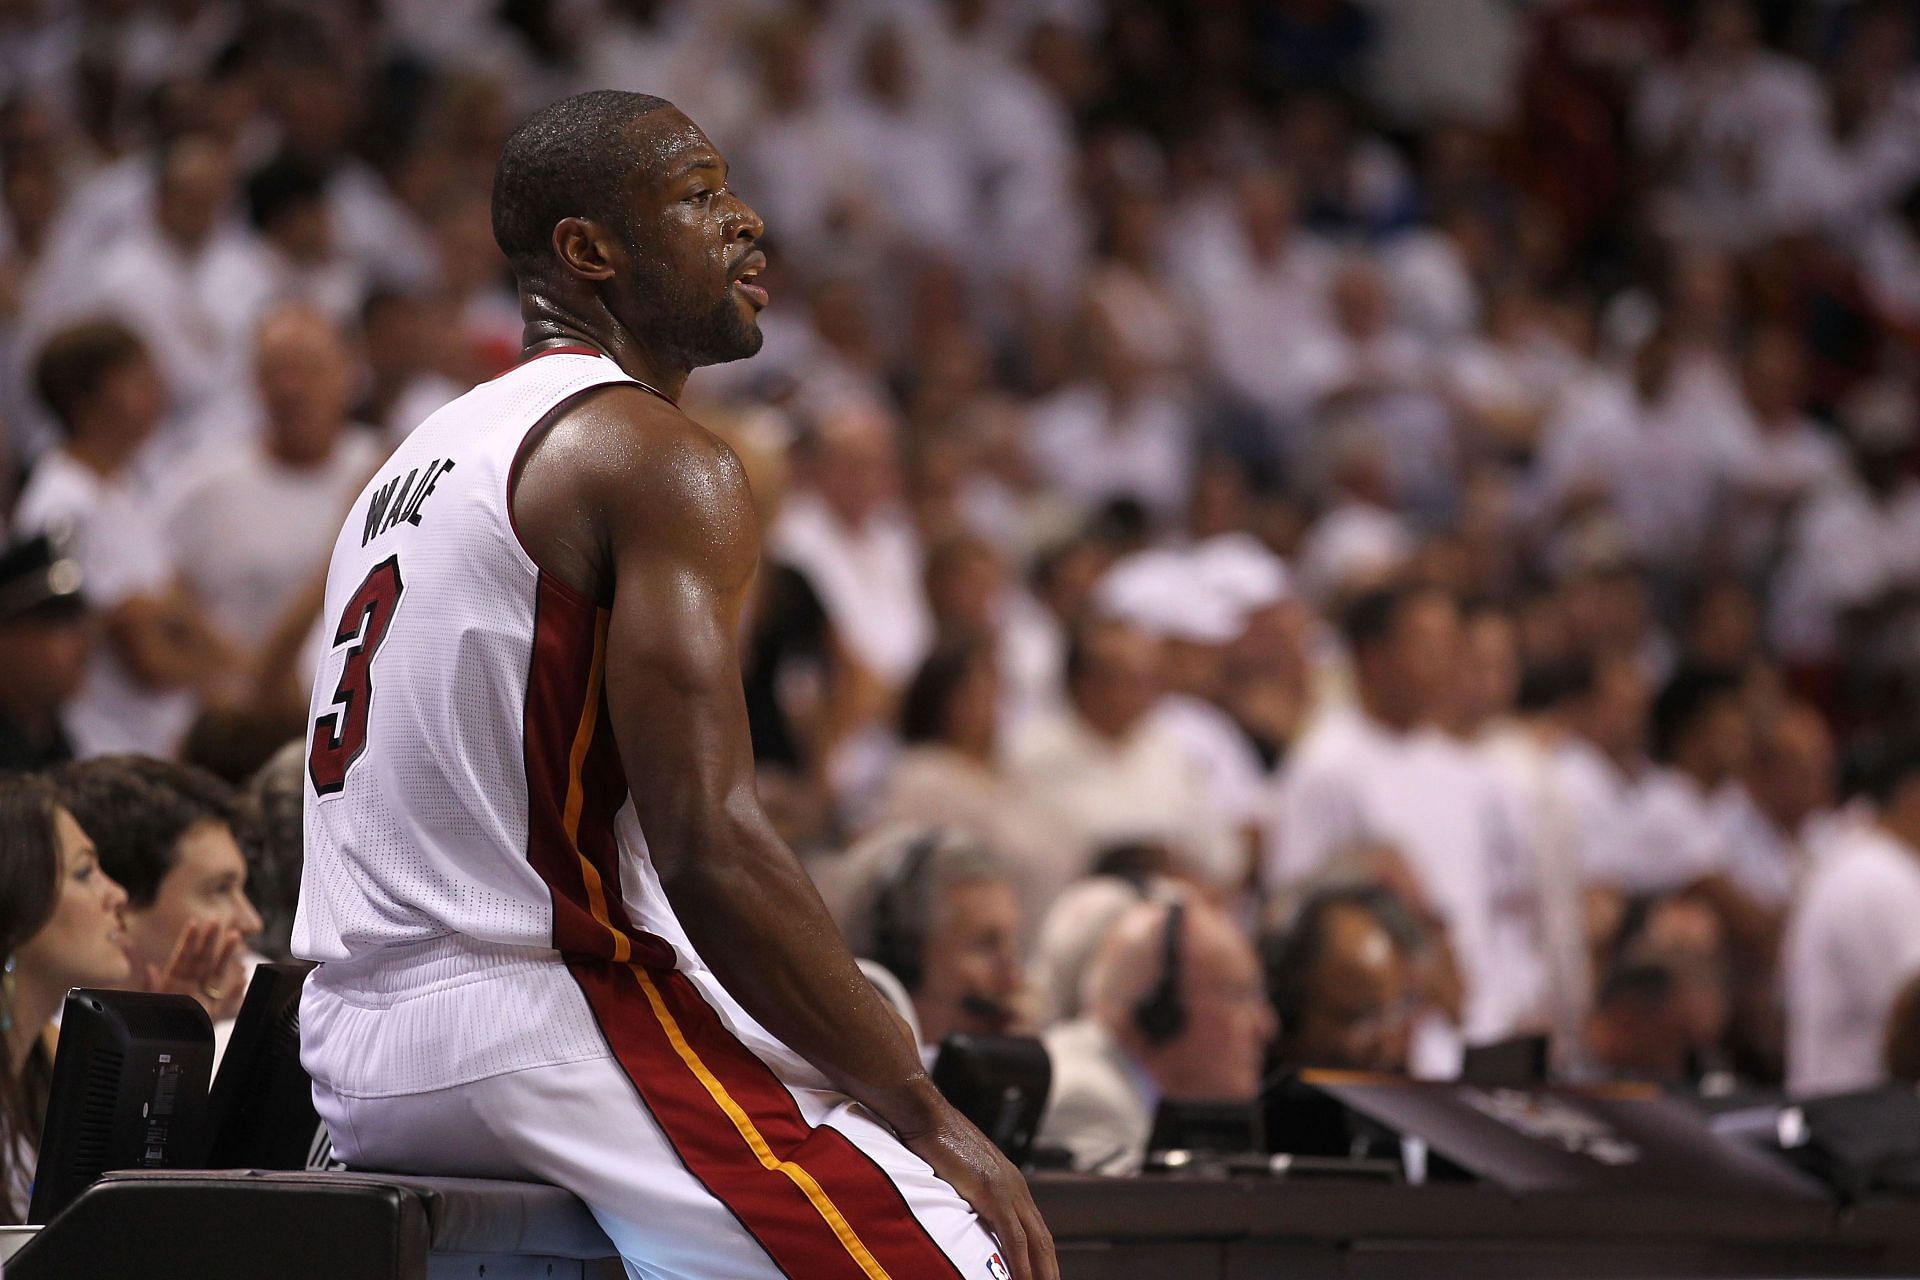 Dwyane Wade carried Miami over the Dallas Mavericks in the 2006 NBA Finals (Image via Getty Images)